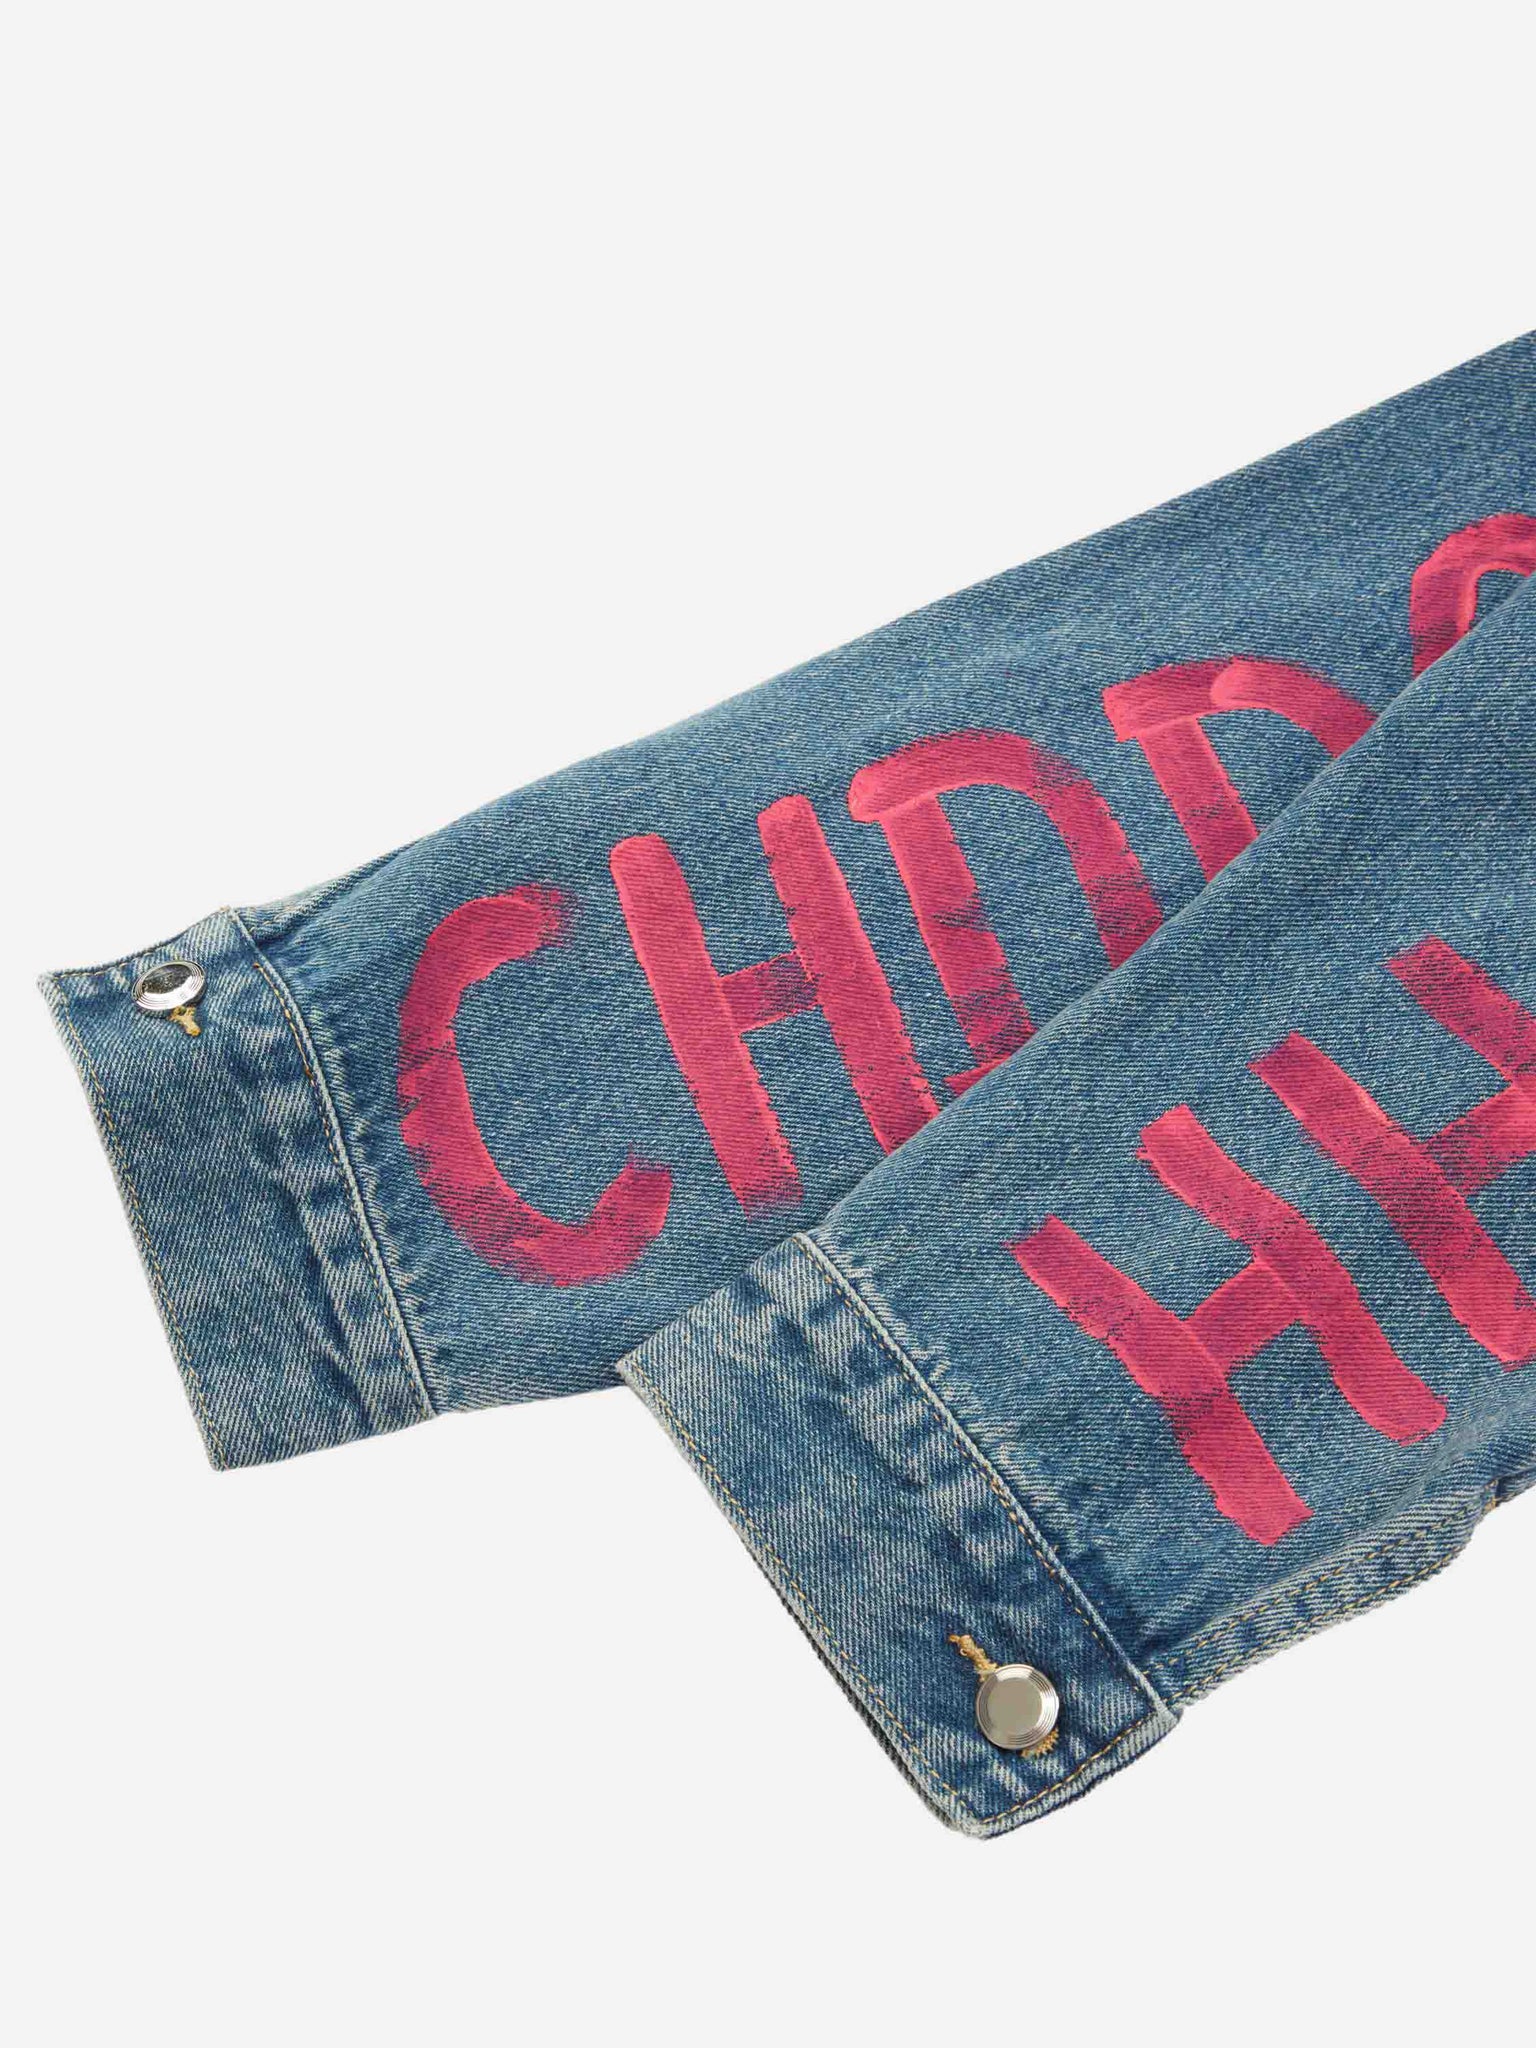 Thesupermade High Street Graffiti Lettered Distressed Washed Denim Jacket